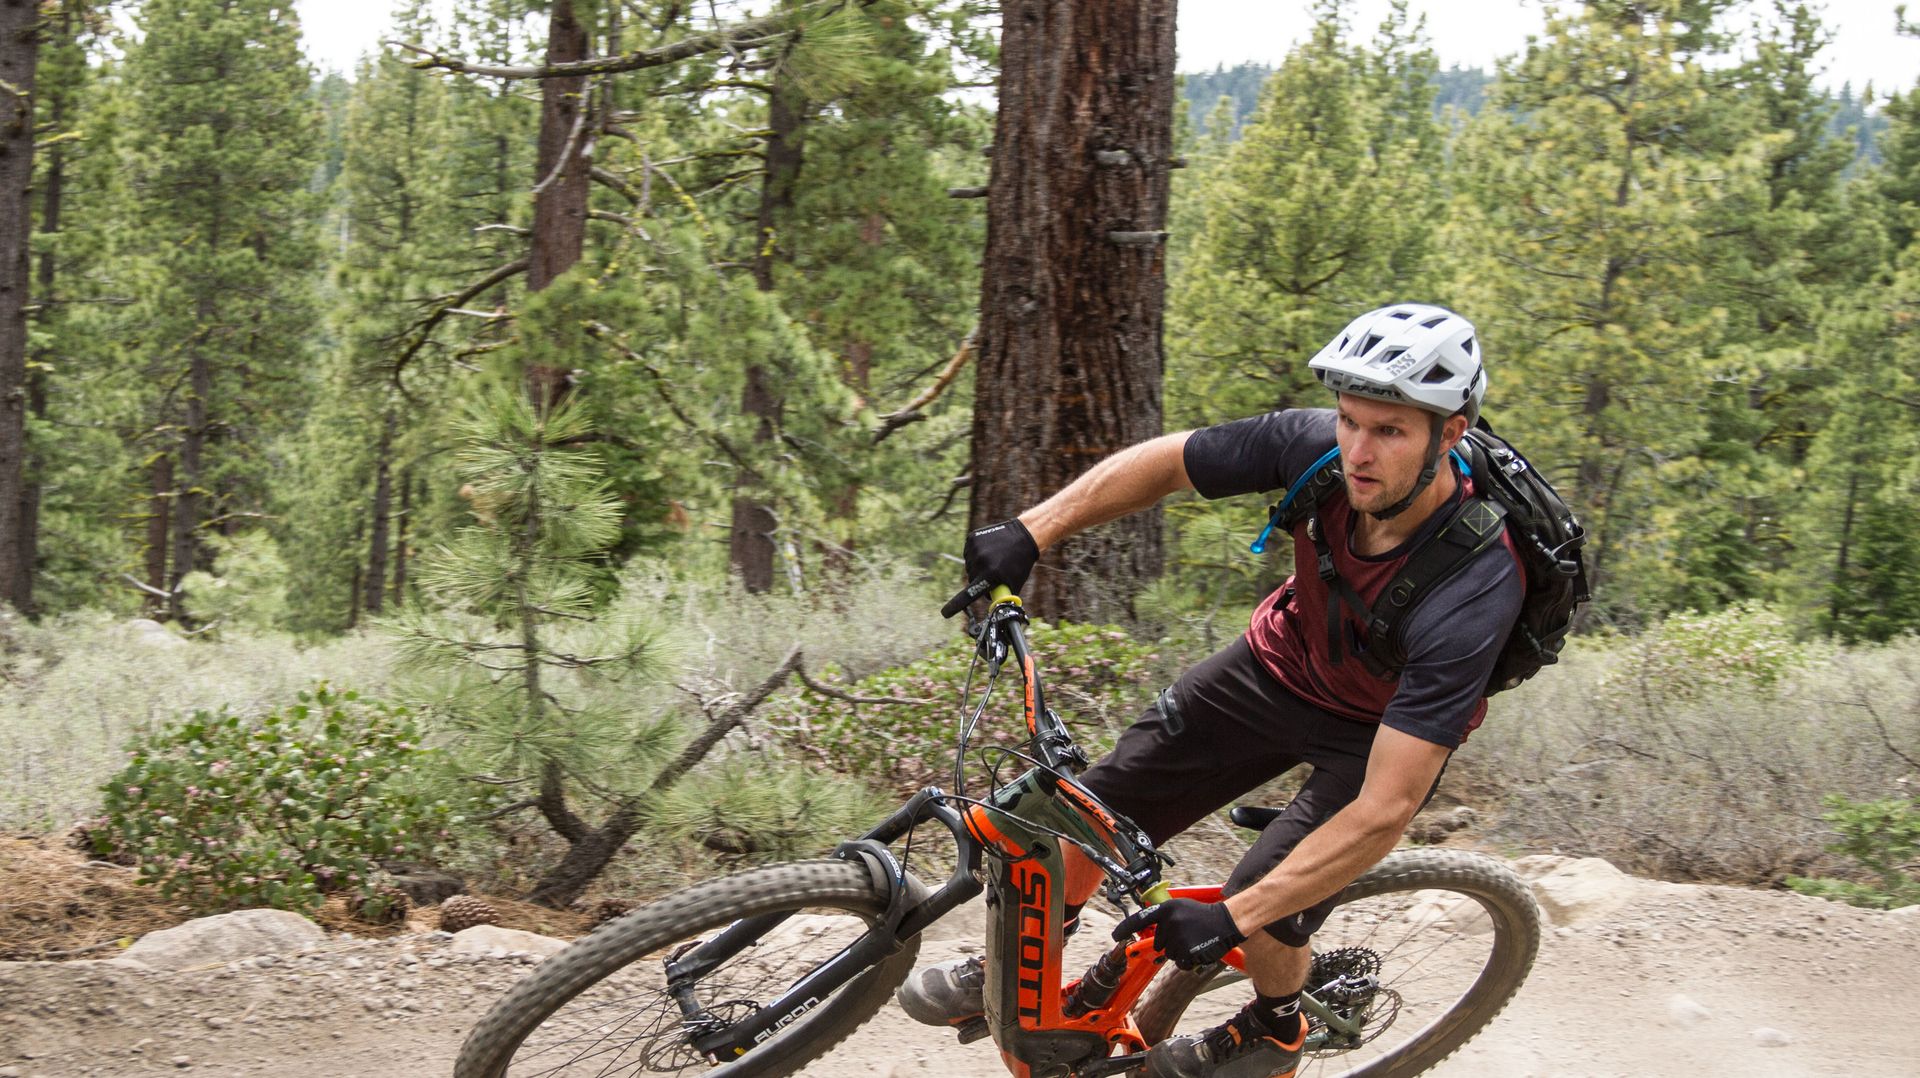 Paul Basagoitia Used to Cliffs. Now He Rides an E-Bike.